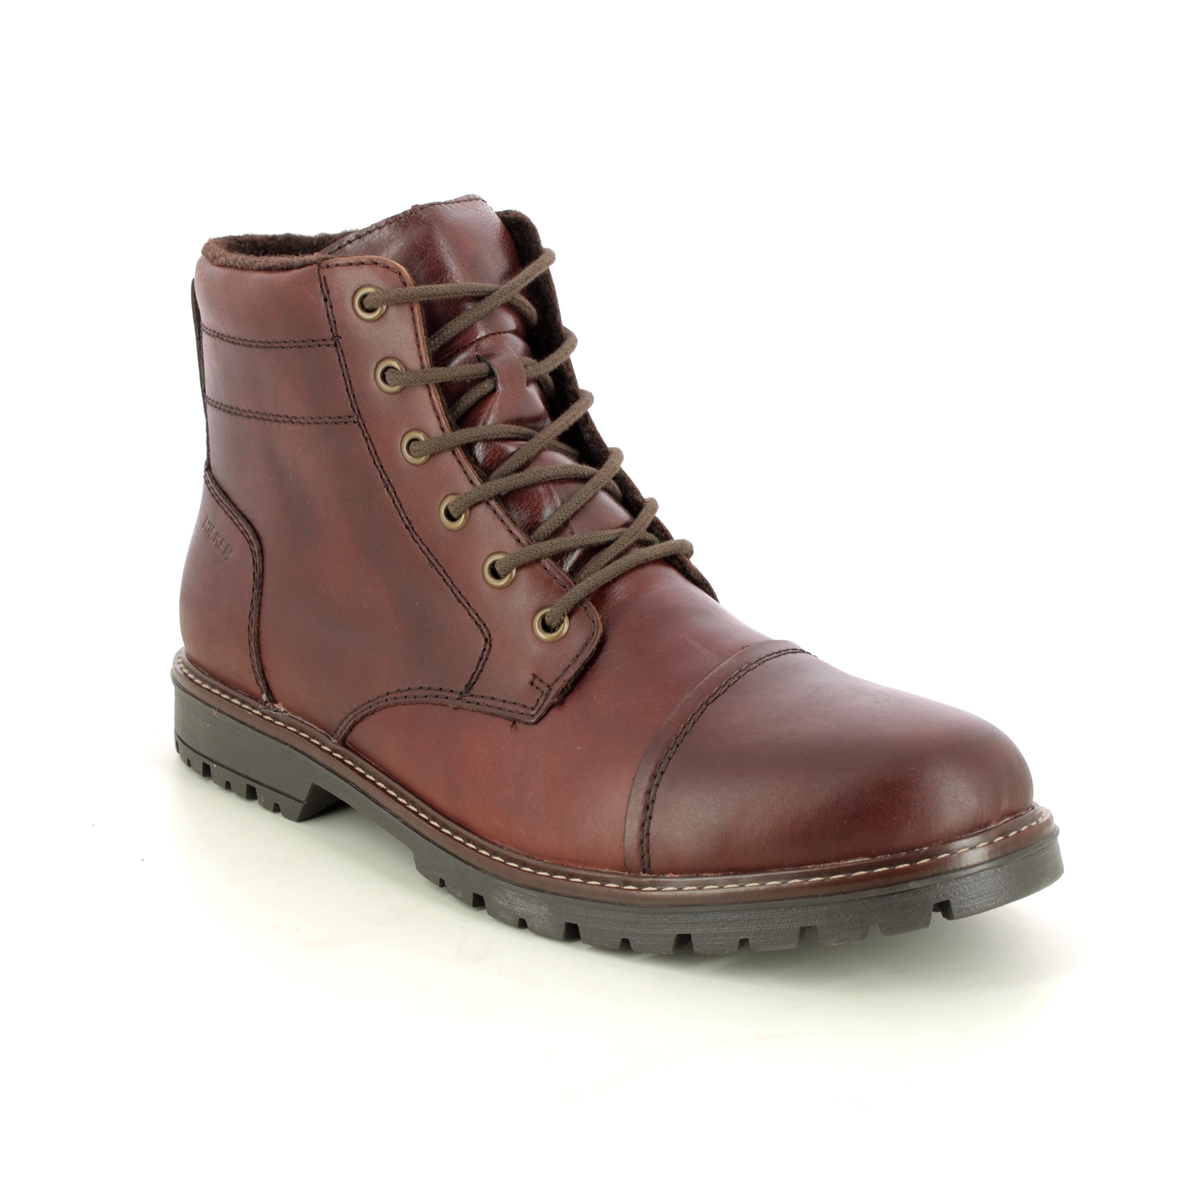 Rieker Vittore Cap Brown Leather Mens Winter Boots F3604-25 In Size 46 In Plain Brown Leather